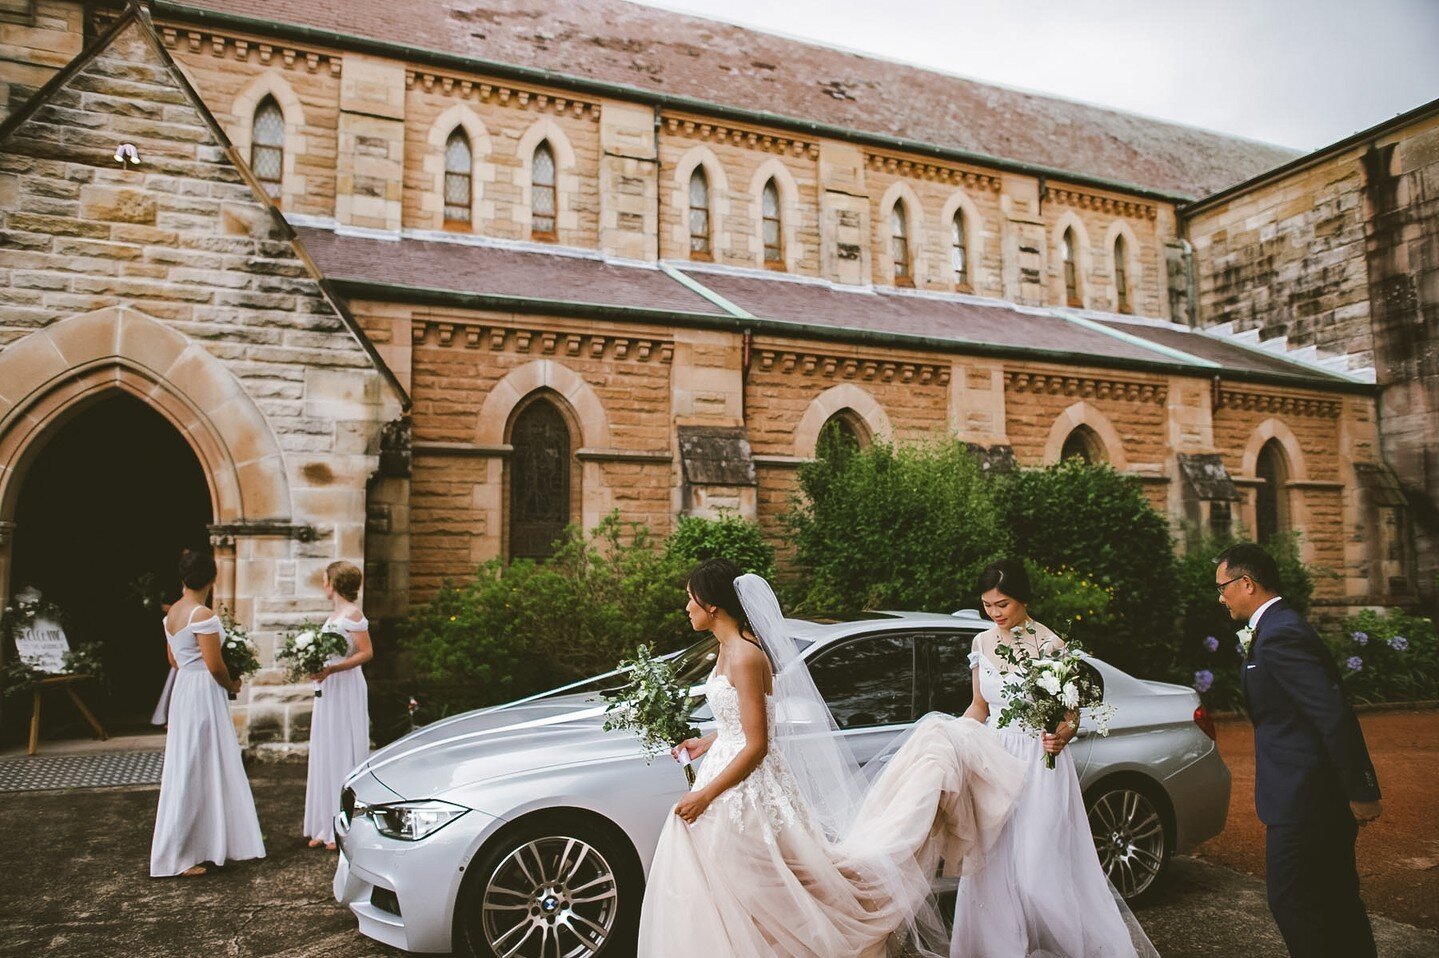 We are excited to announce that we have partnered with St Stephen&rsquo;s Willoughby and have the privilege of looking after all their weddings.

This beautiful church is built of Sydney sandstone and can comfortably seat 300 guests. However, even wi